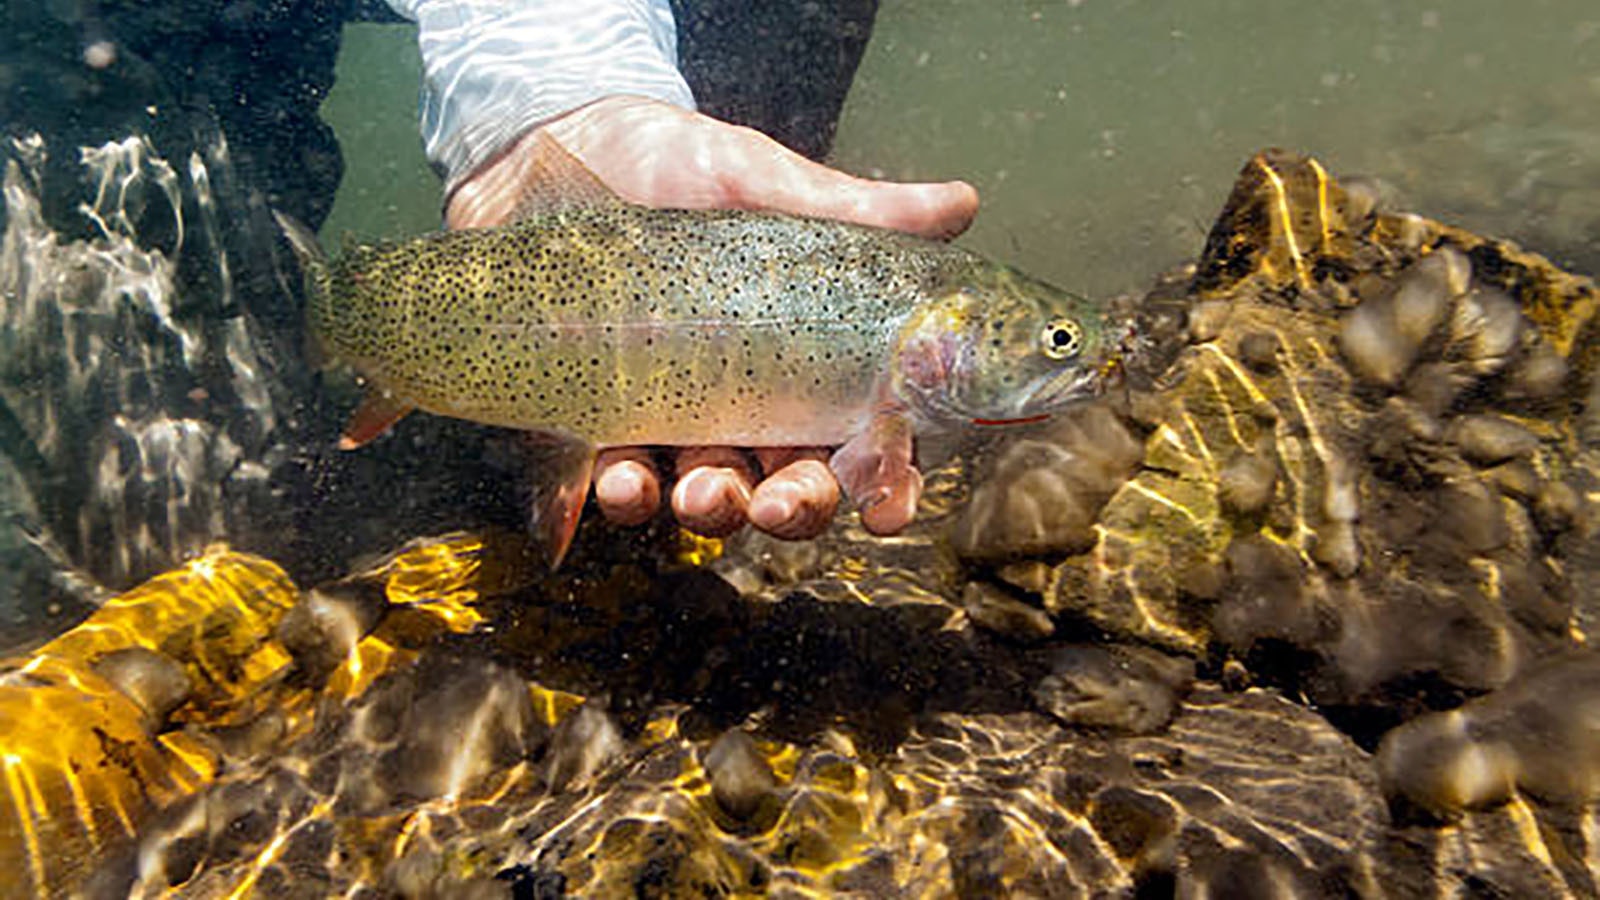 Yellowstone cutthroat trout have struggled in their native waters. The Forest Service is considering killing all the rainbow trout in a popular wilderness creek to give the cutthroats and edge.